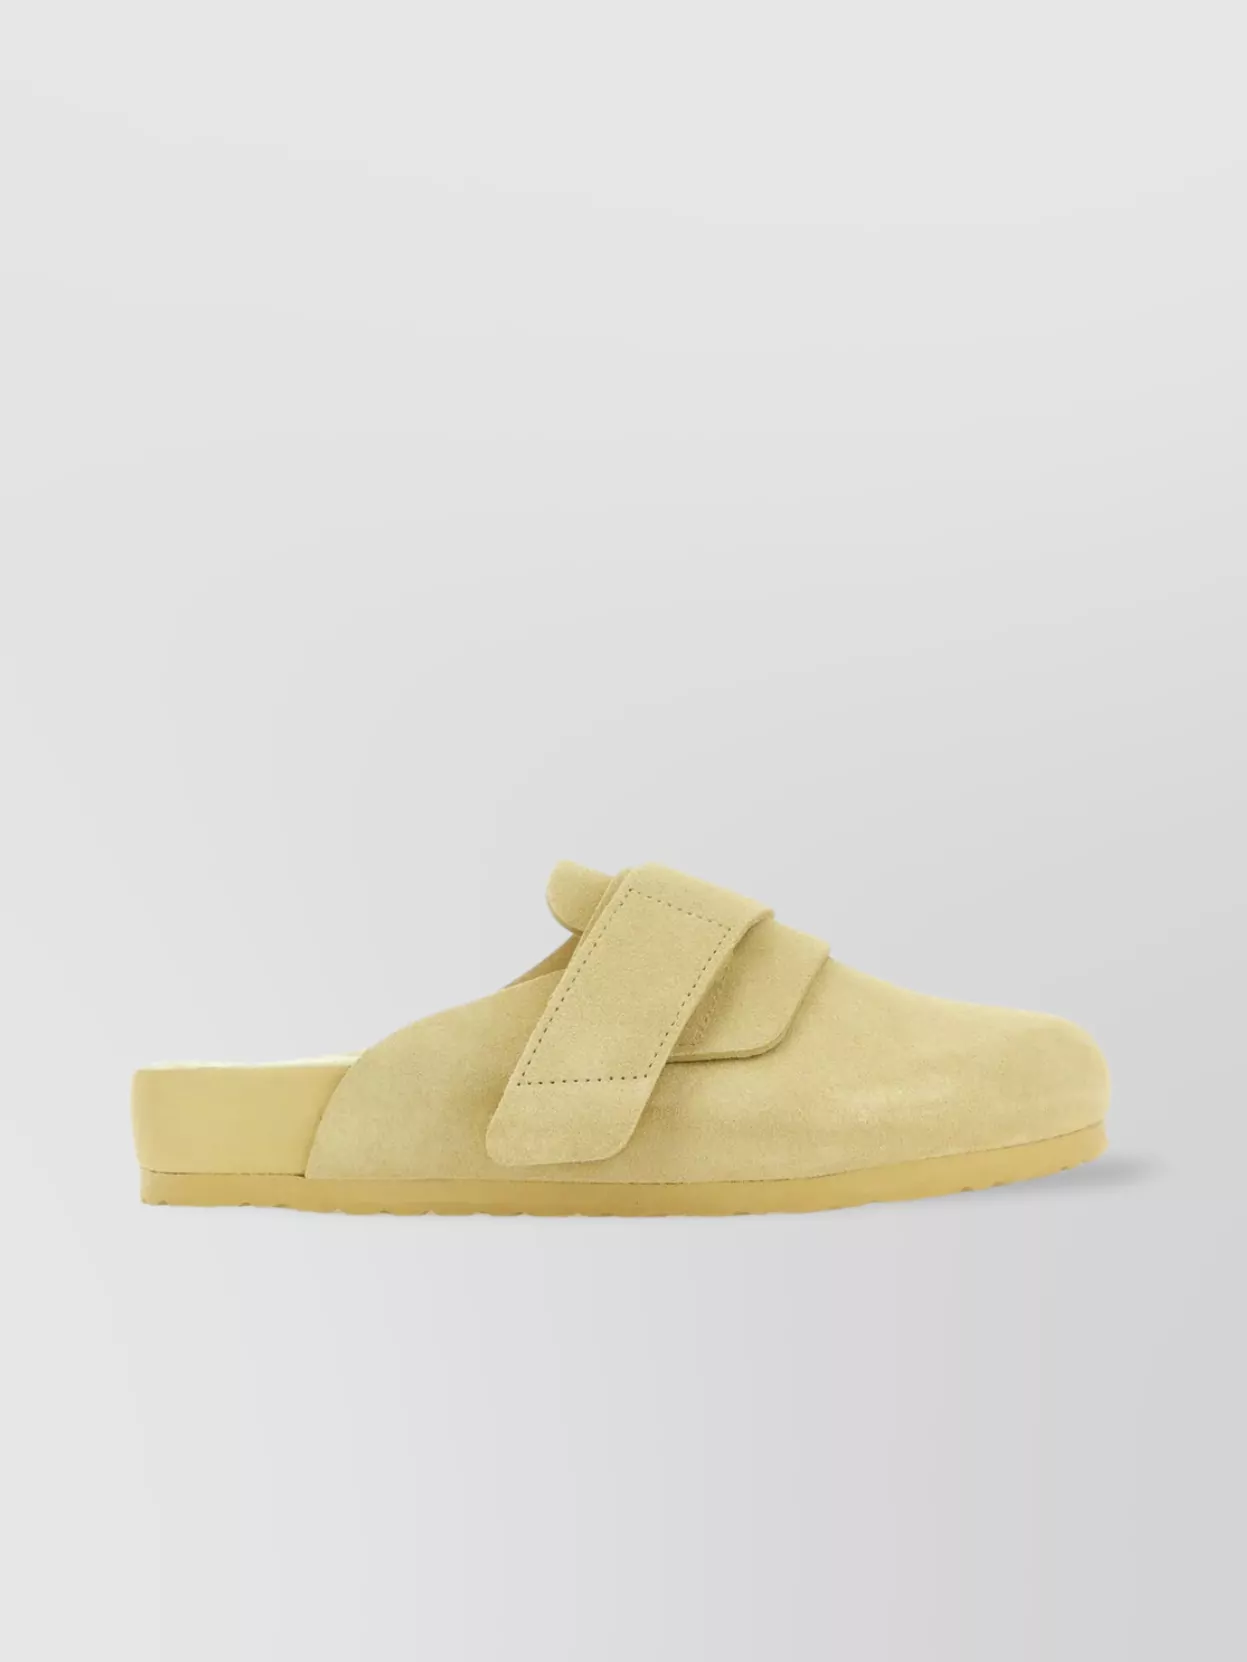 Shop Birkenstock 1774 Nagoya Slippers With Suede Upper And Flat Sole